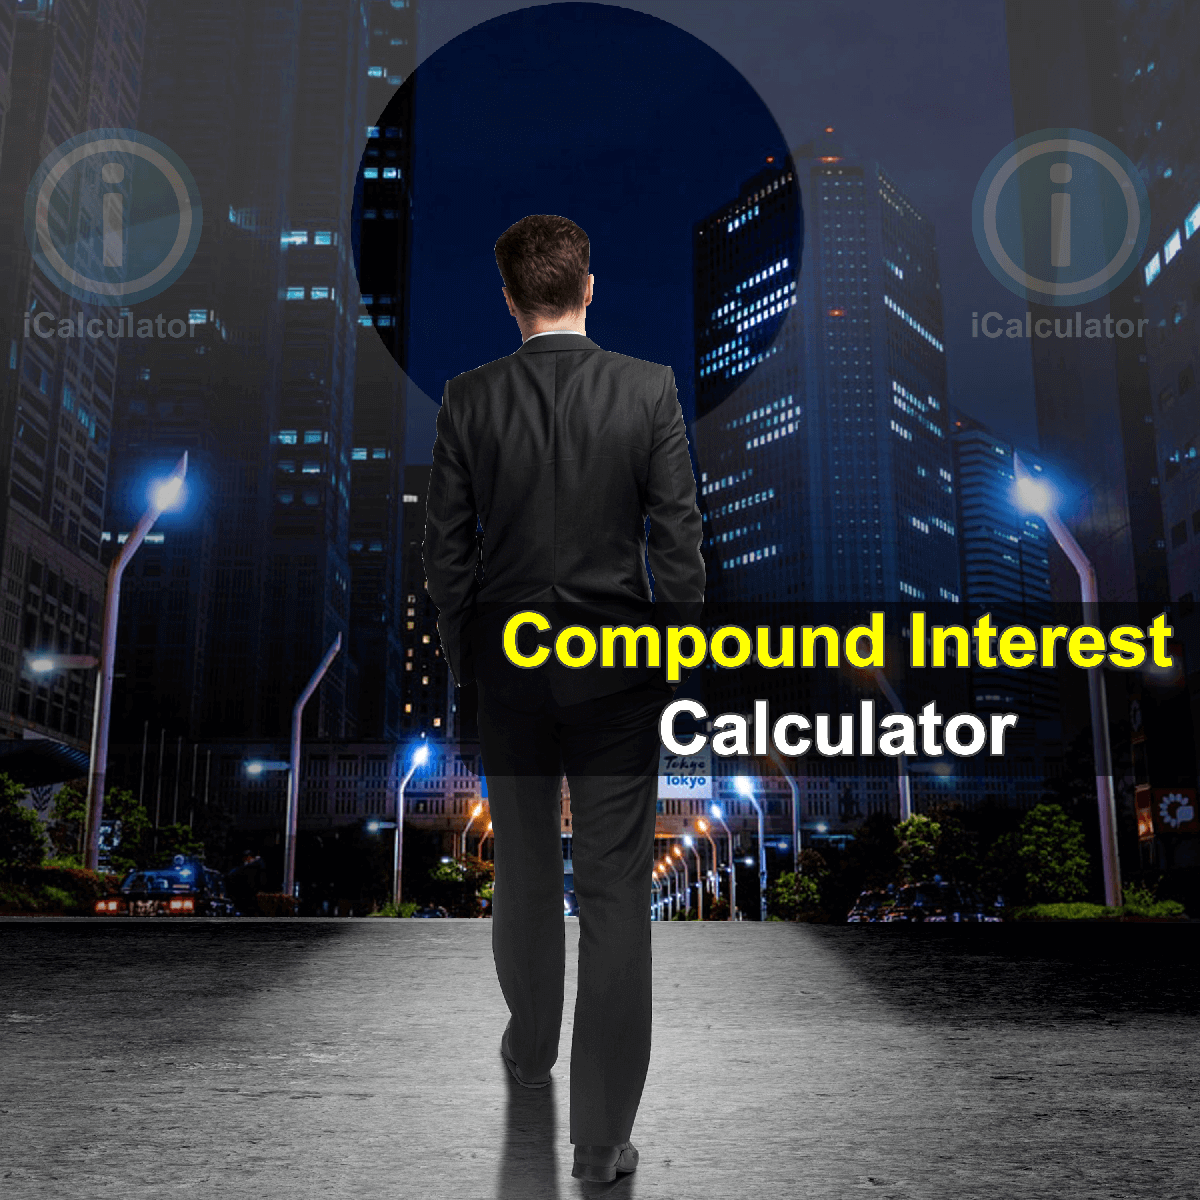 Periodic Compound Interest Calculator. This image provides details of how to calculate periodic compound interest using a calculator, pen and notepad. By using the Periodic Compound Interest formula, the Periodic Compound Interest Calculator provides a good insight into the importance of periodic compound interest, crucially with regard to earning interest with financial products, such as fixed deposits and certain mutual funds.